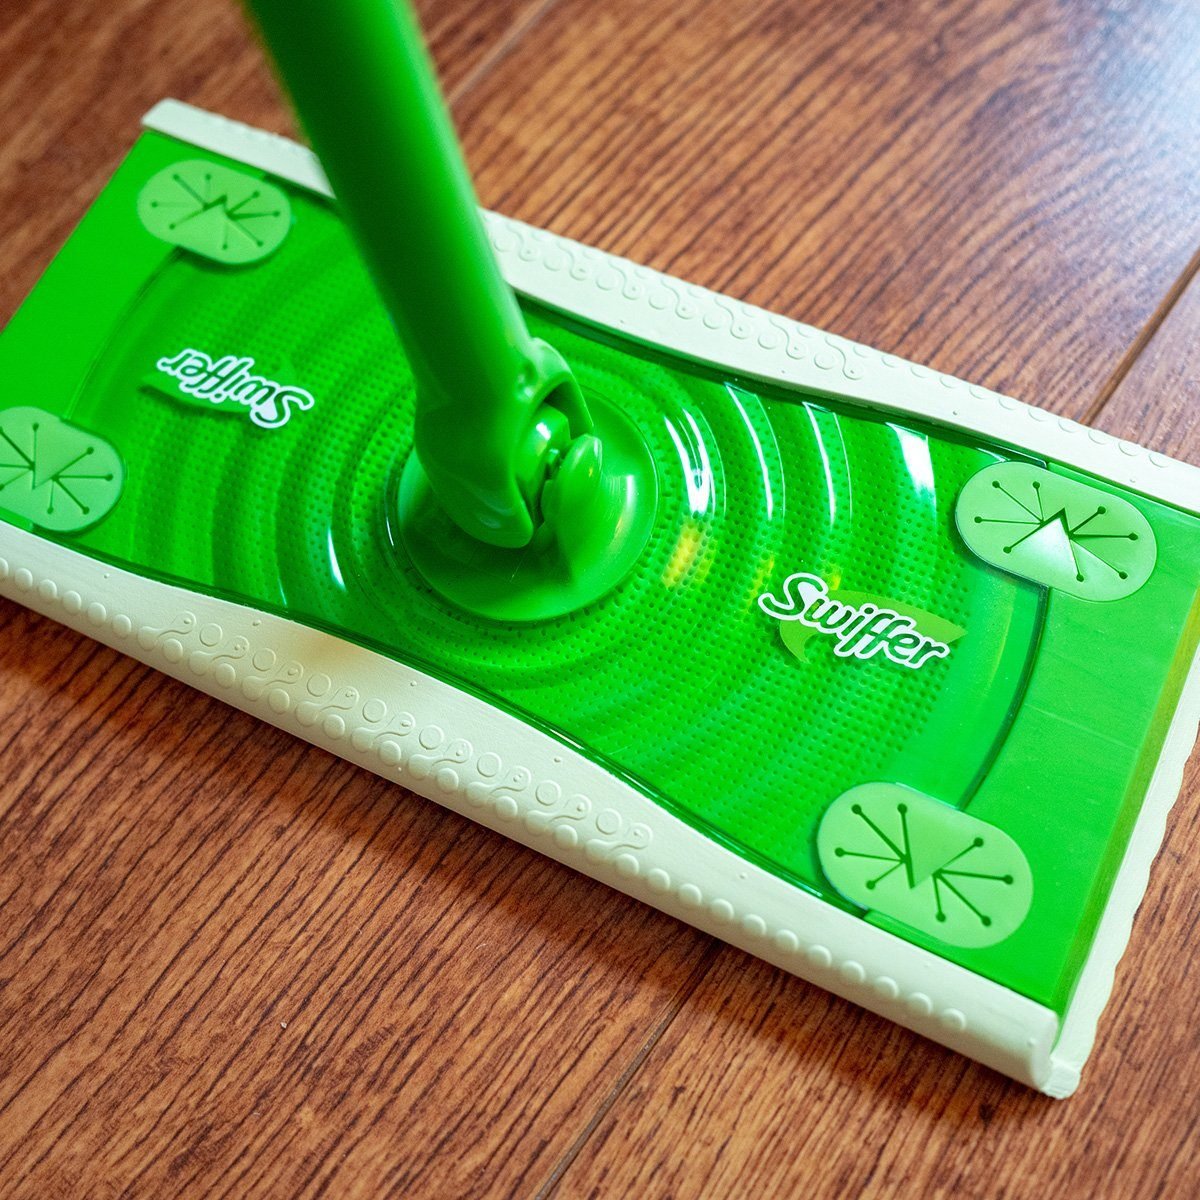 Clean With A Swiffer, Can Swiffer Wetjet Wood Be Used On Laminate Floors